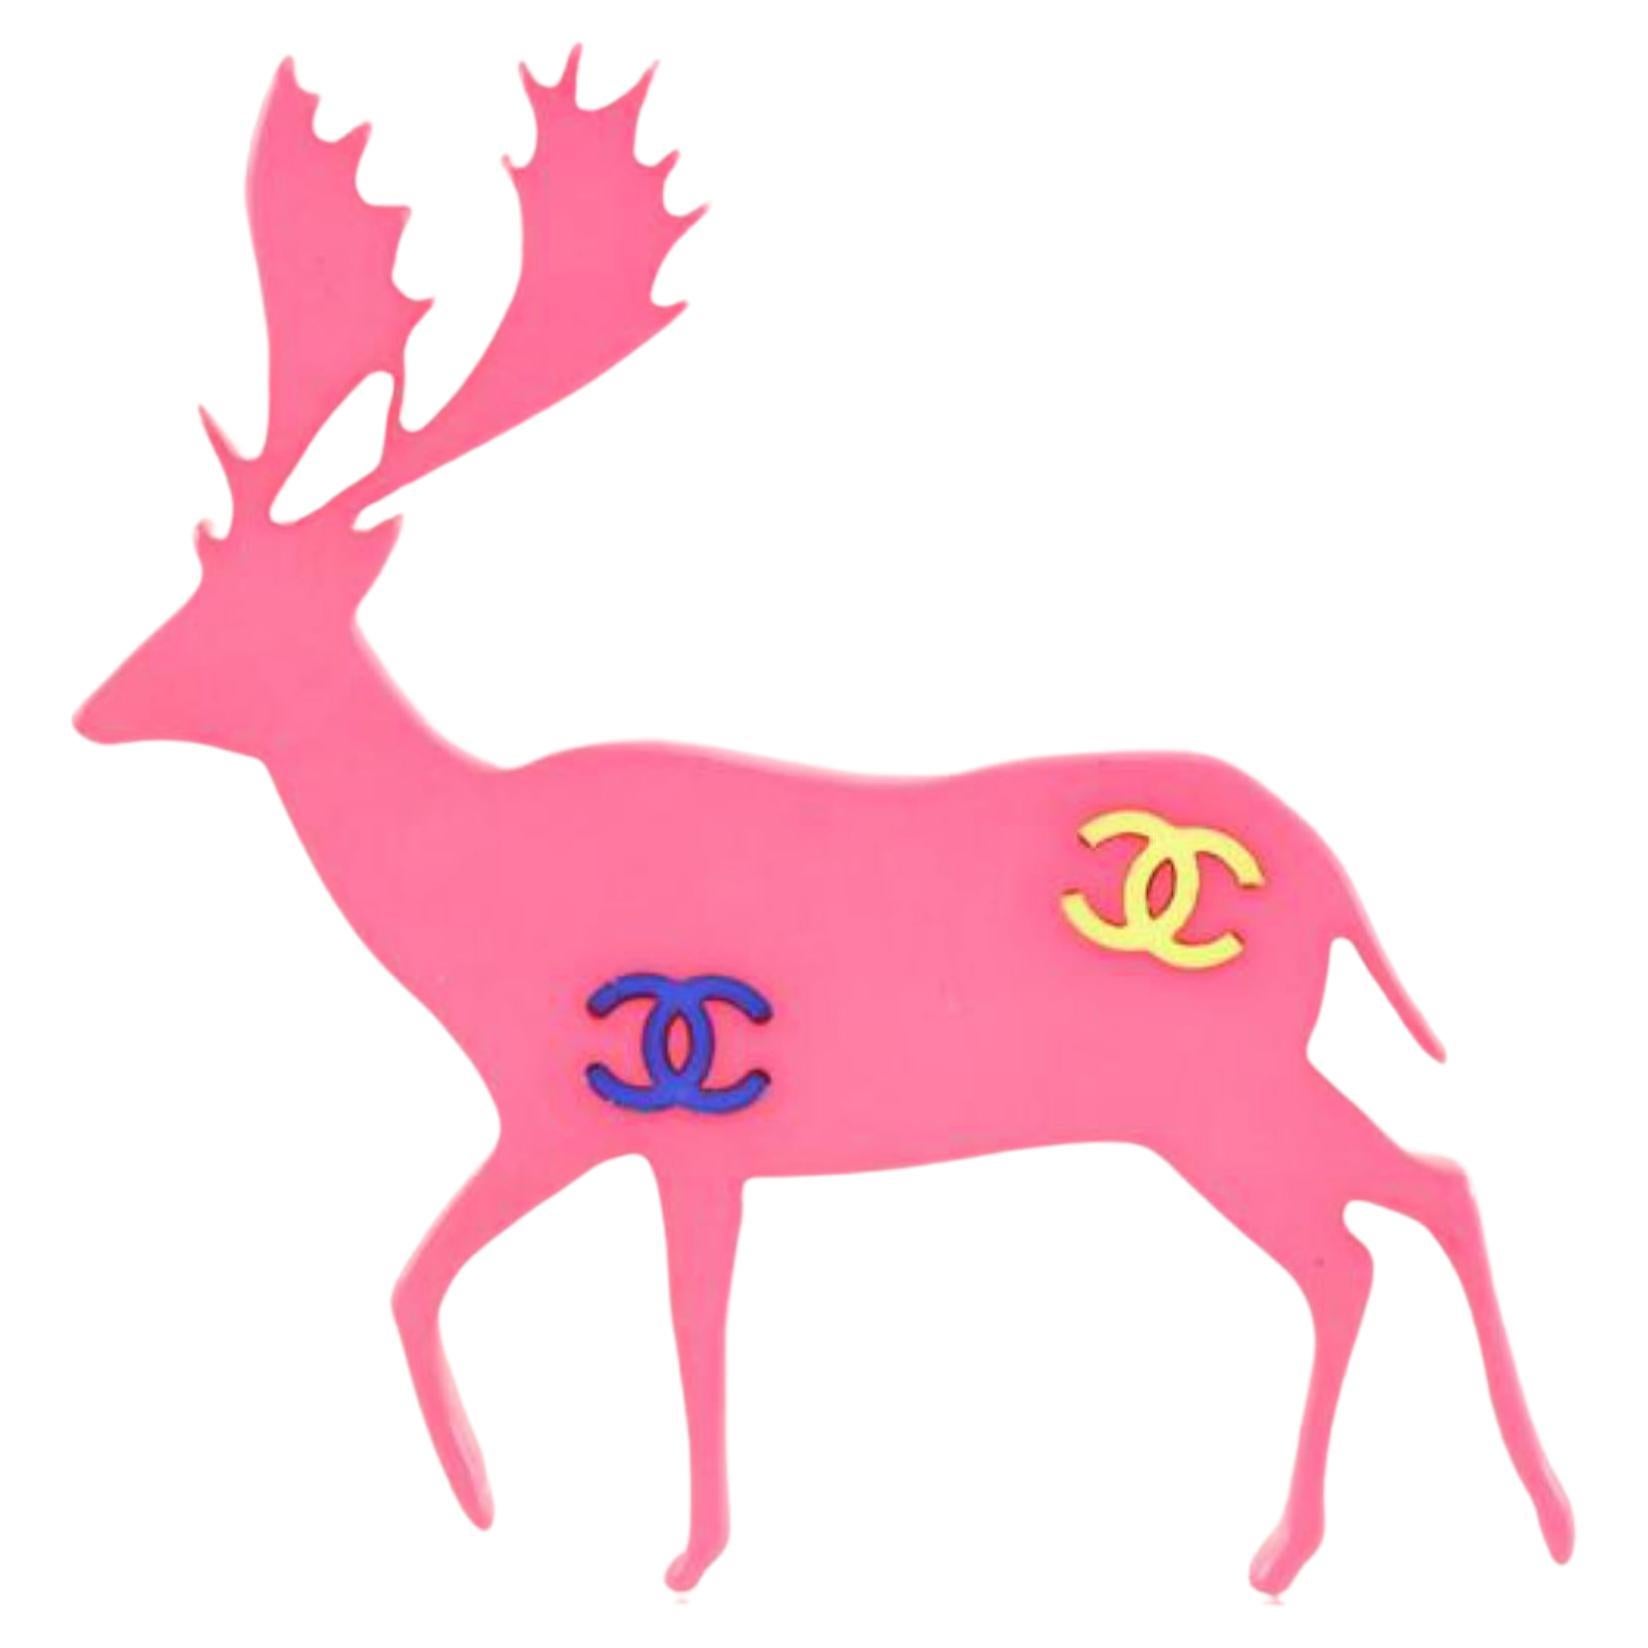 Chanel Pink Christmas Holiday CC Multicolor Reindeer Deer Brooch Pin 21cz76s